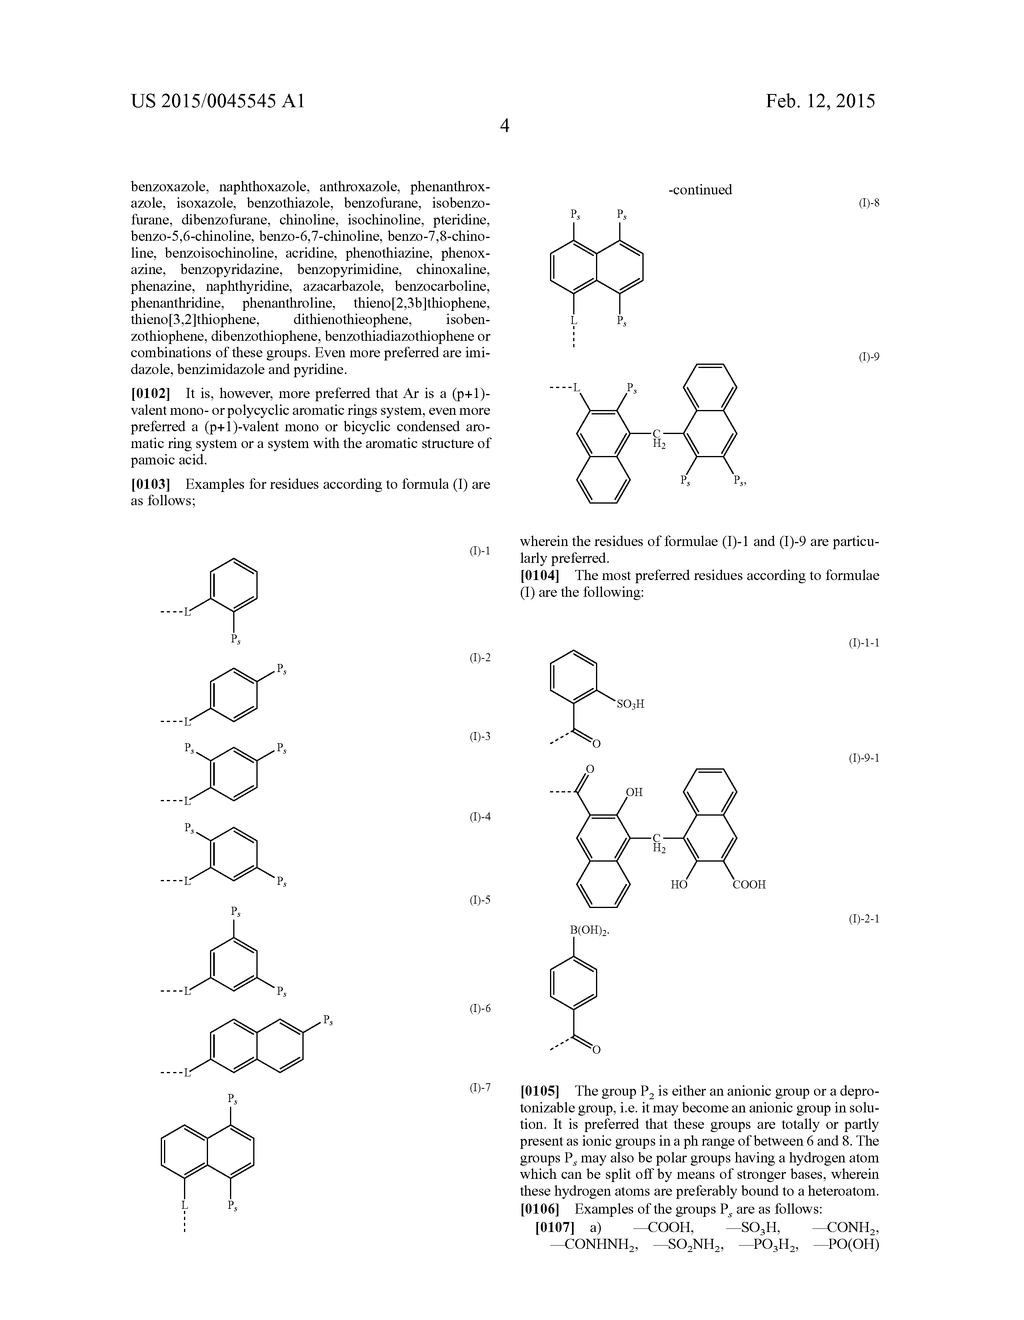 SORBENT COMPRISING ON ITS SURFACE AN AROMATIC RING SYSTEM HAVING AN     ANIONIC OR DEPROTONIZABLE GROUP FOR THE PURIFICATION OF ORGANIC MOLECULES - diagram, schematic, and image 11